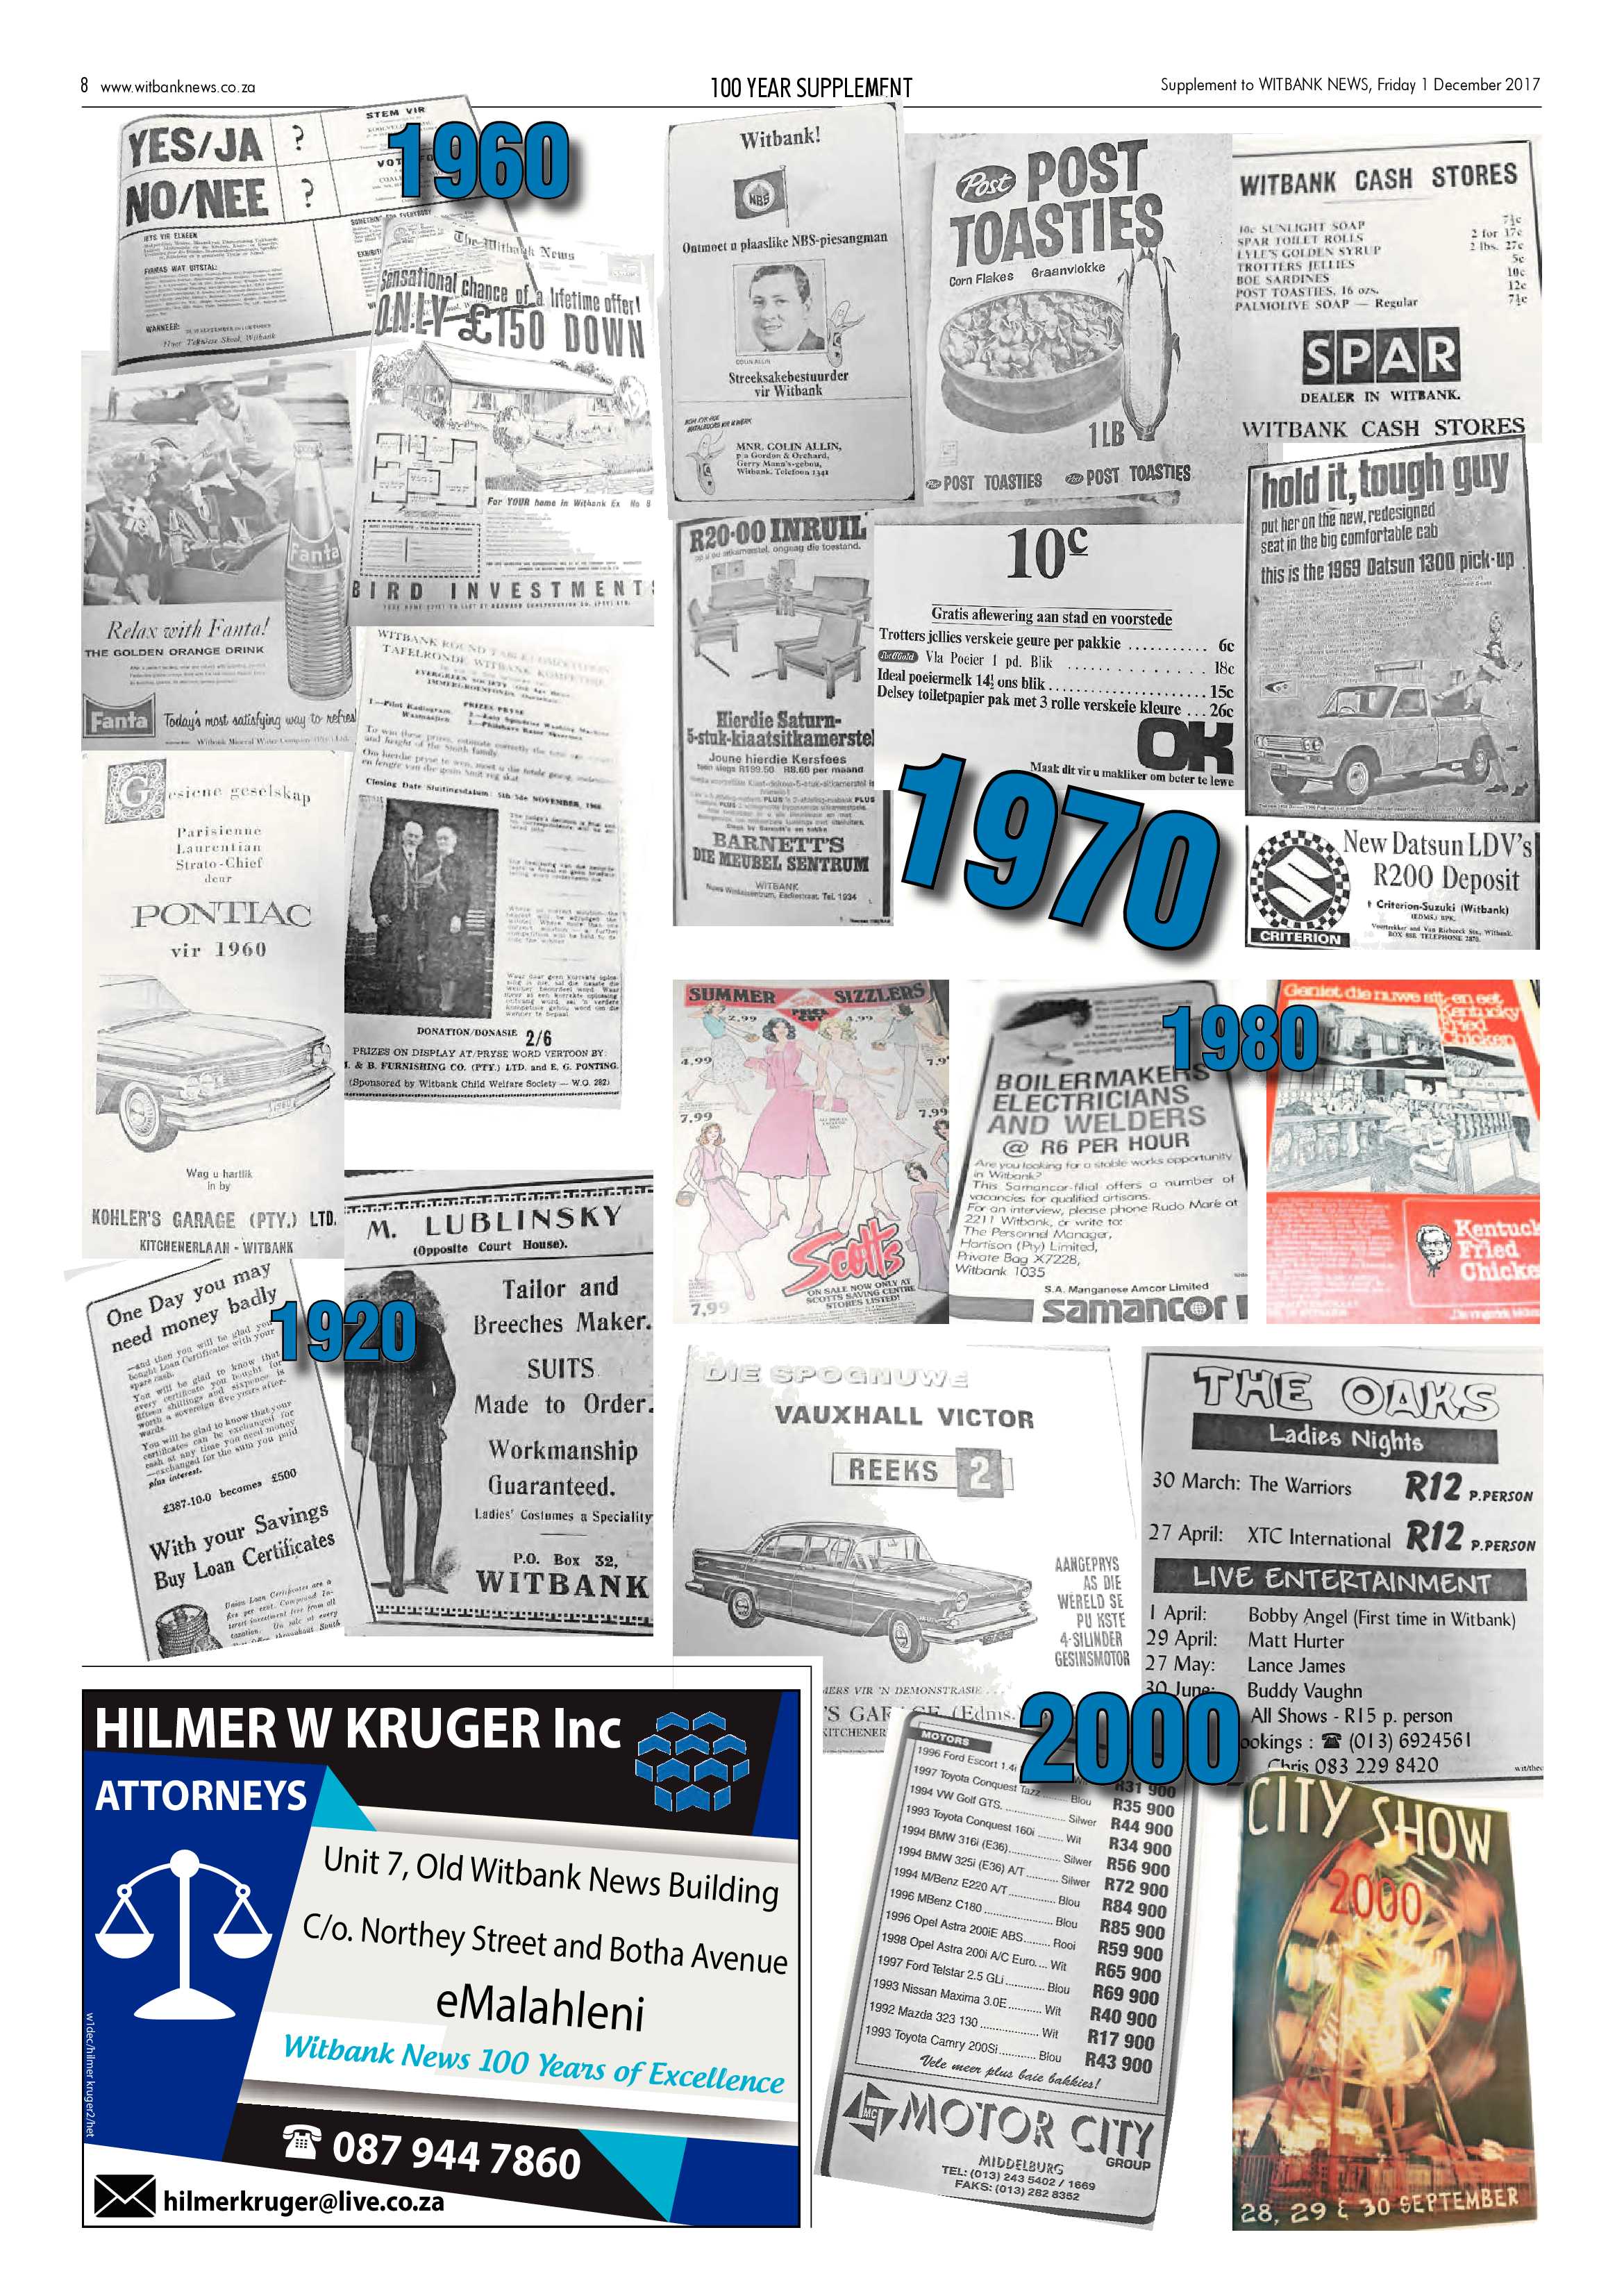 Witbank News 100 Year Supplement page 8